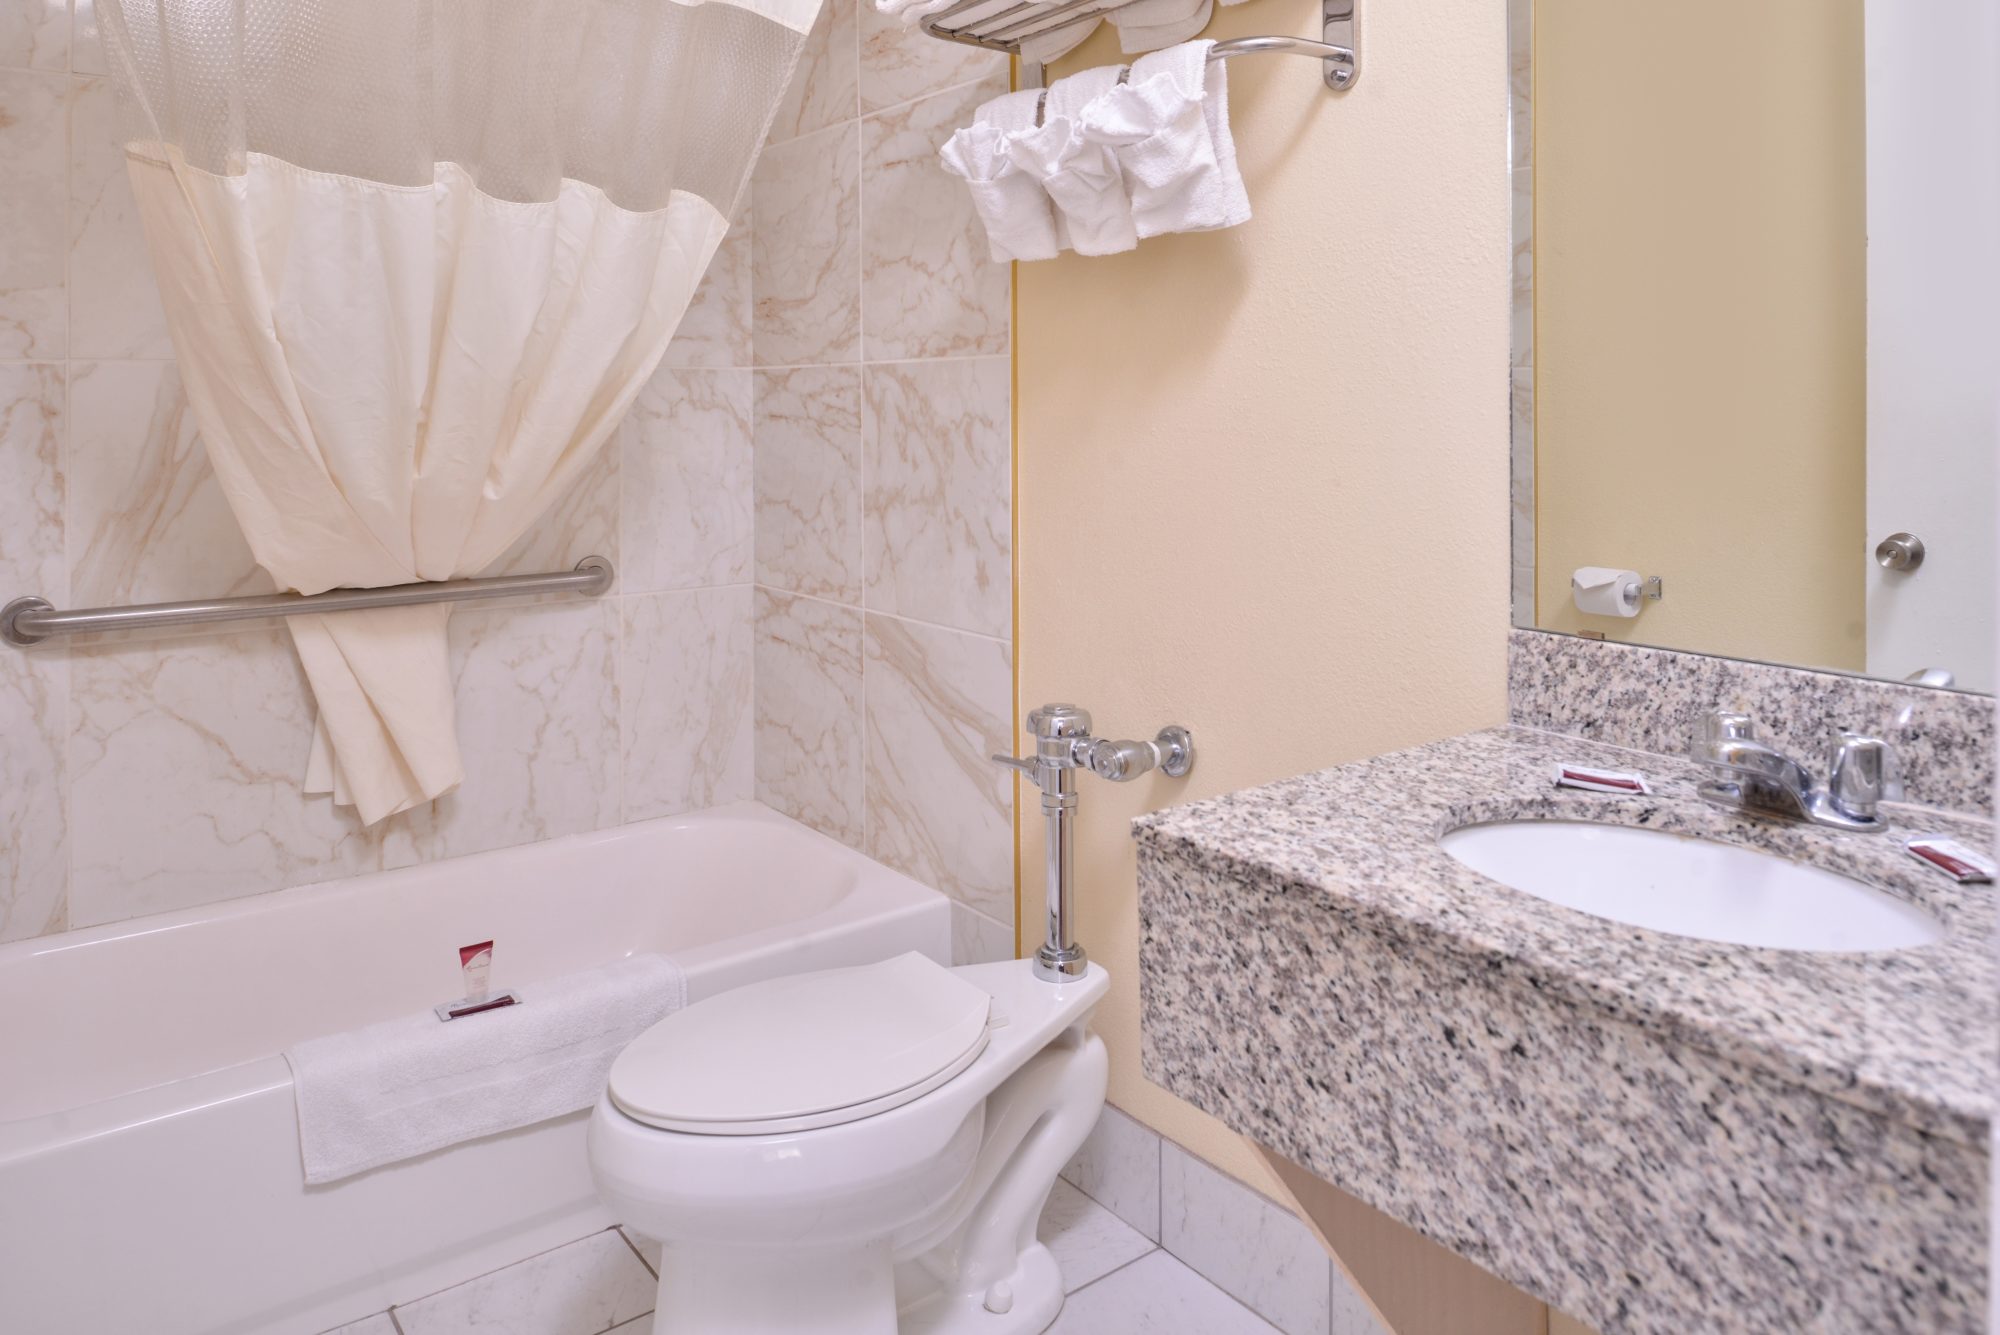 Vanity unit, mirror, towel rail and shelf with towels, shower tub, shower curtain, toilet, tiled flooring